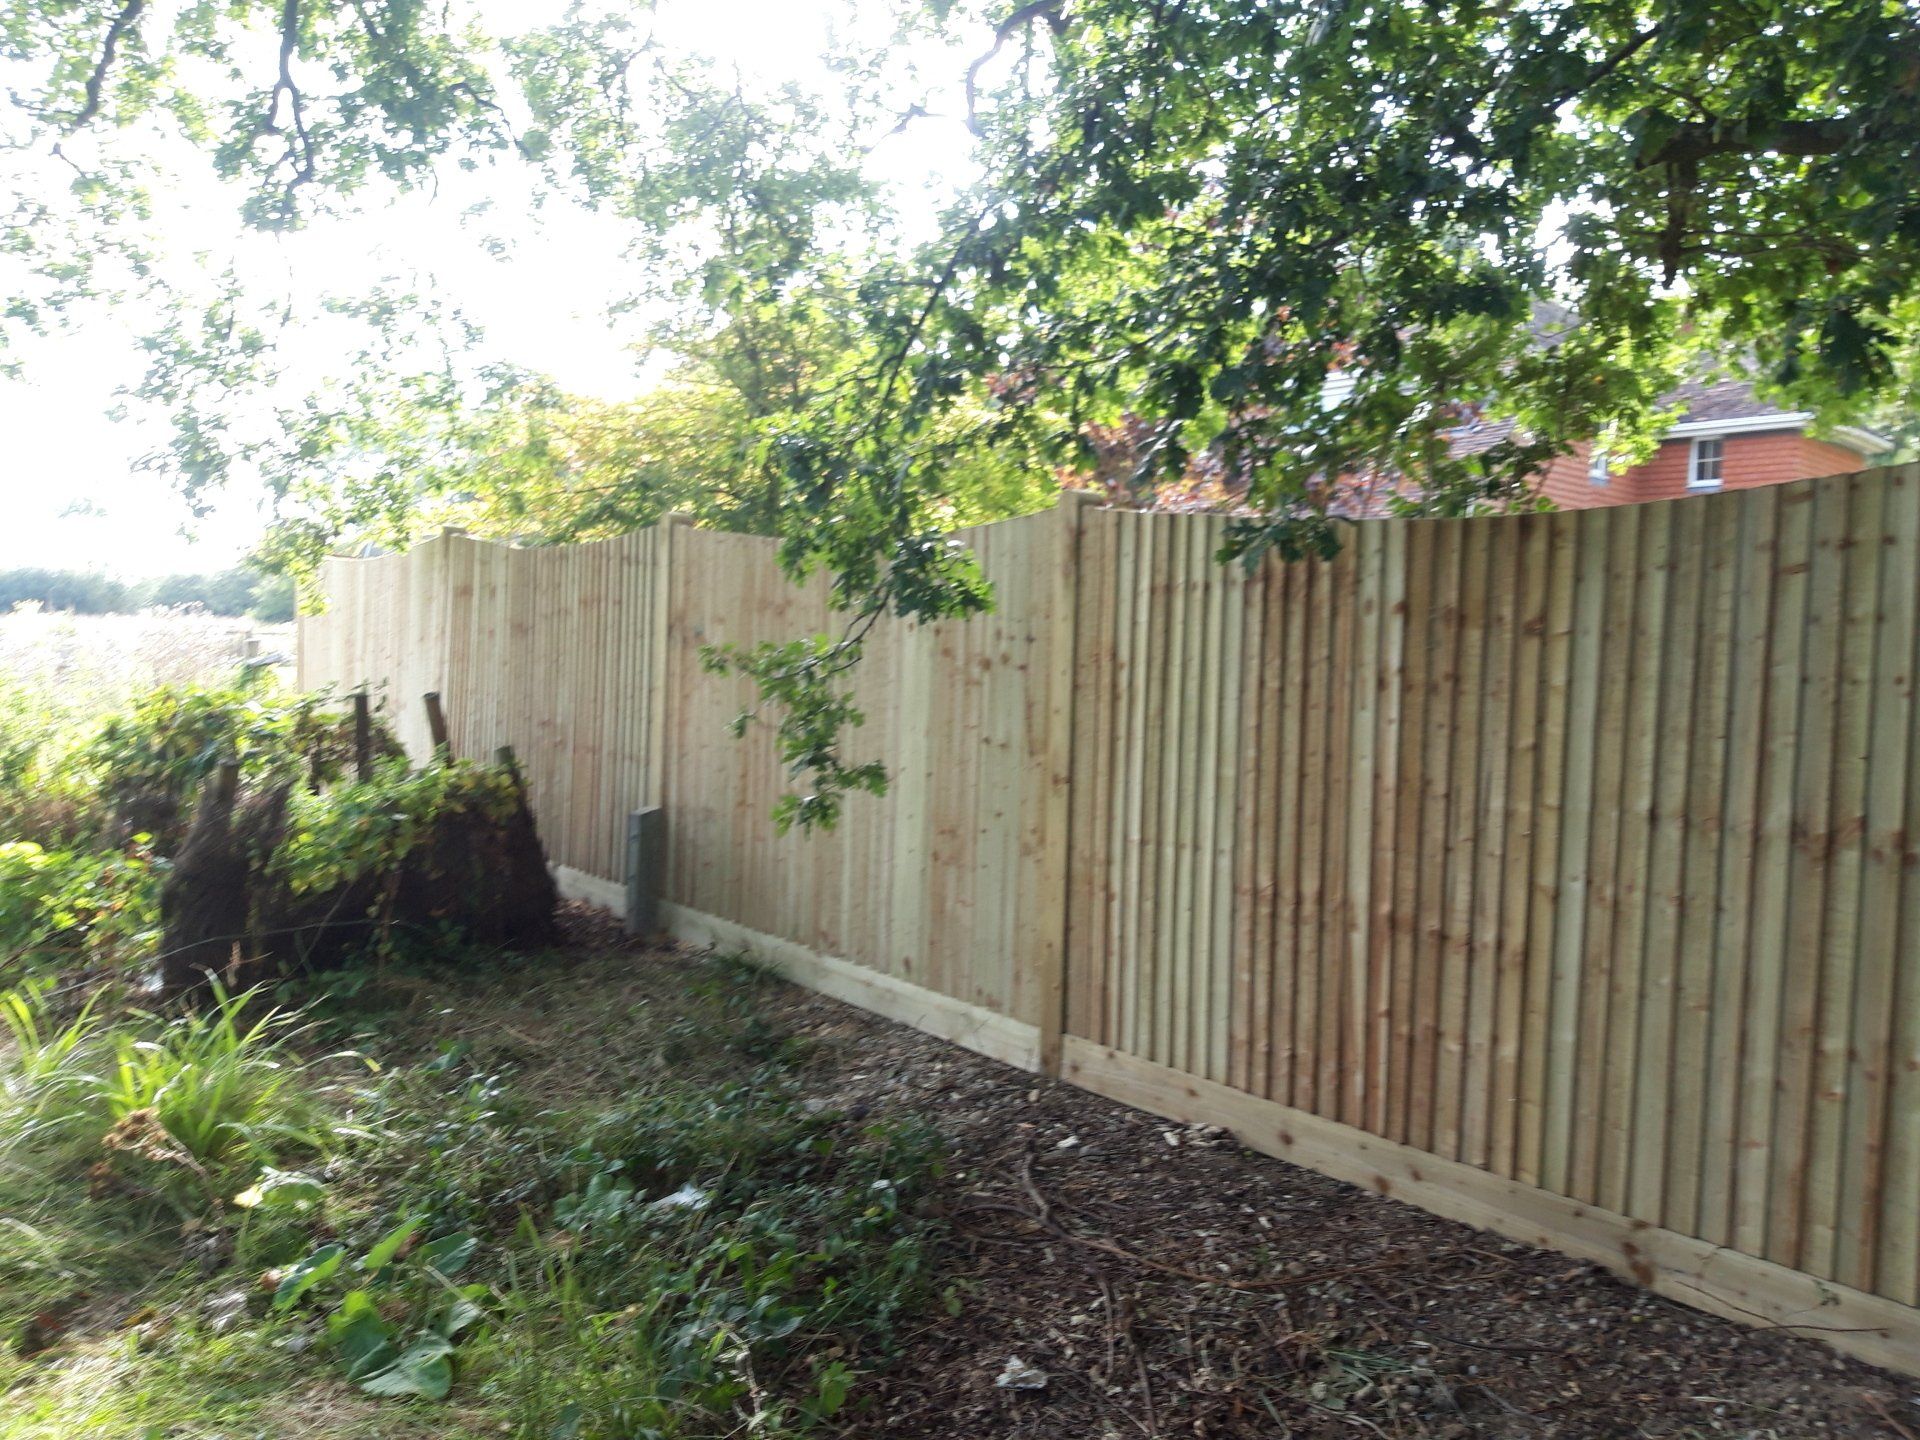 Fencing around a group of trees